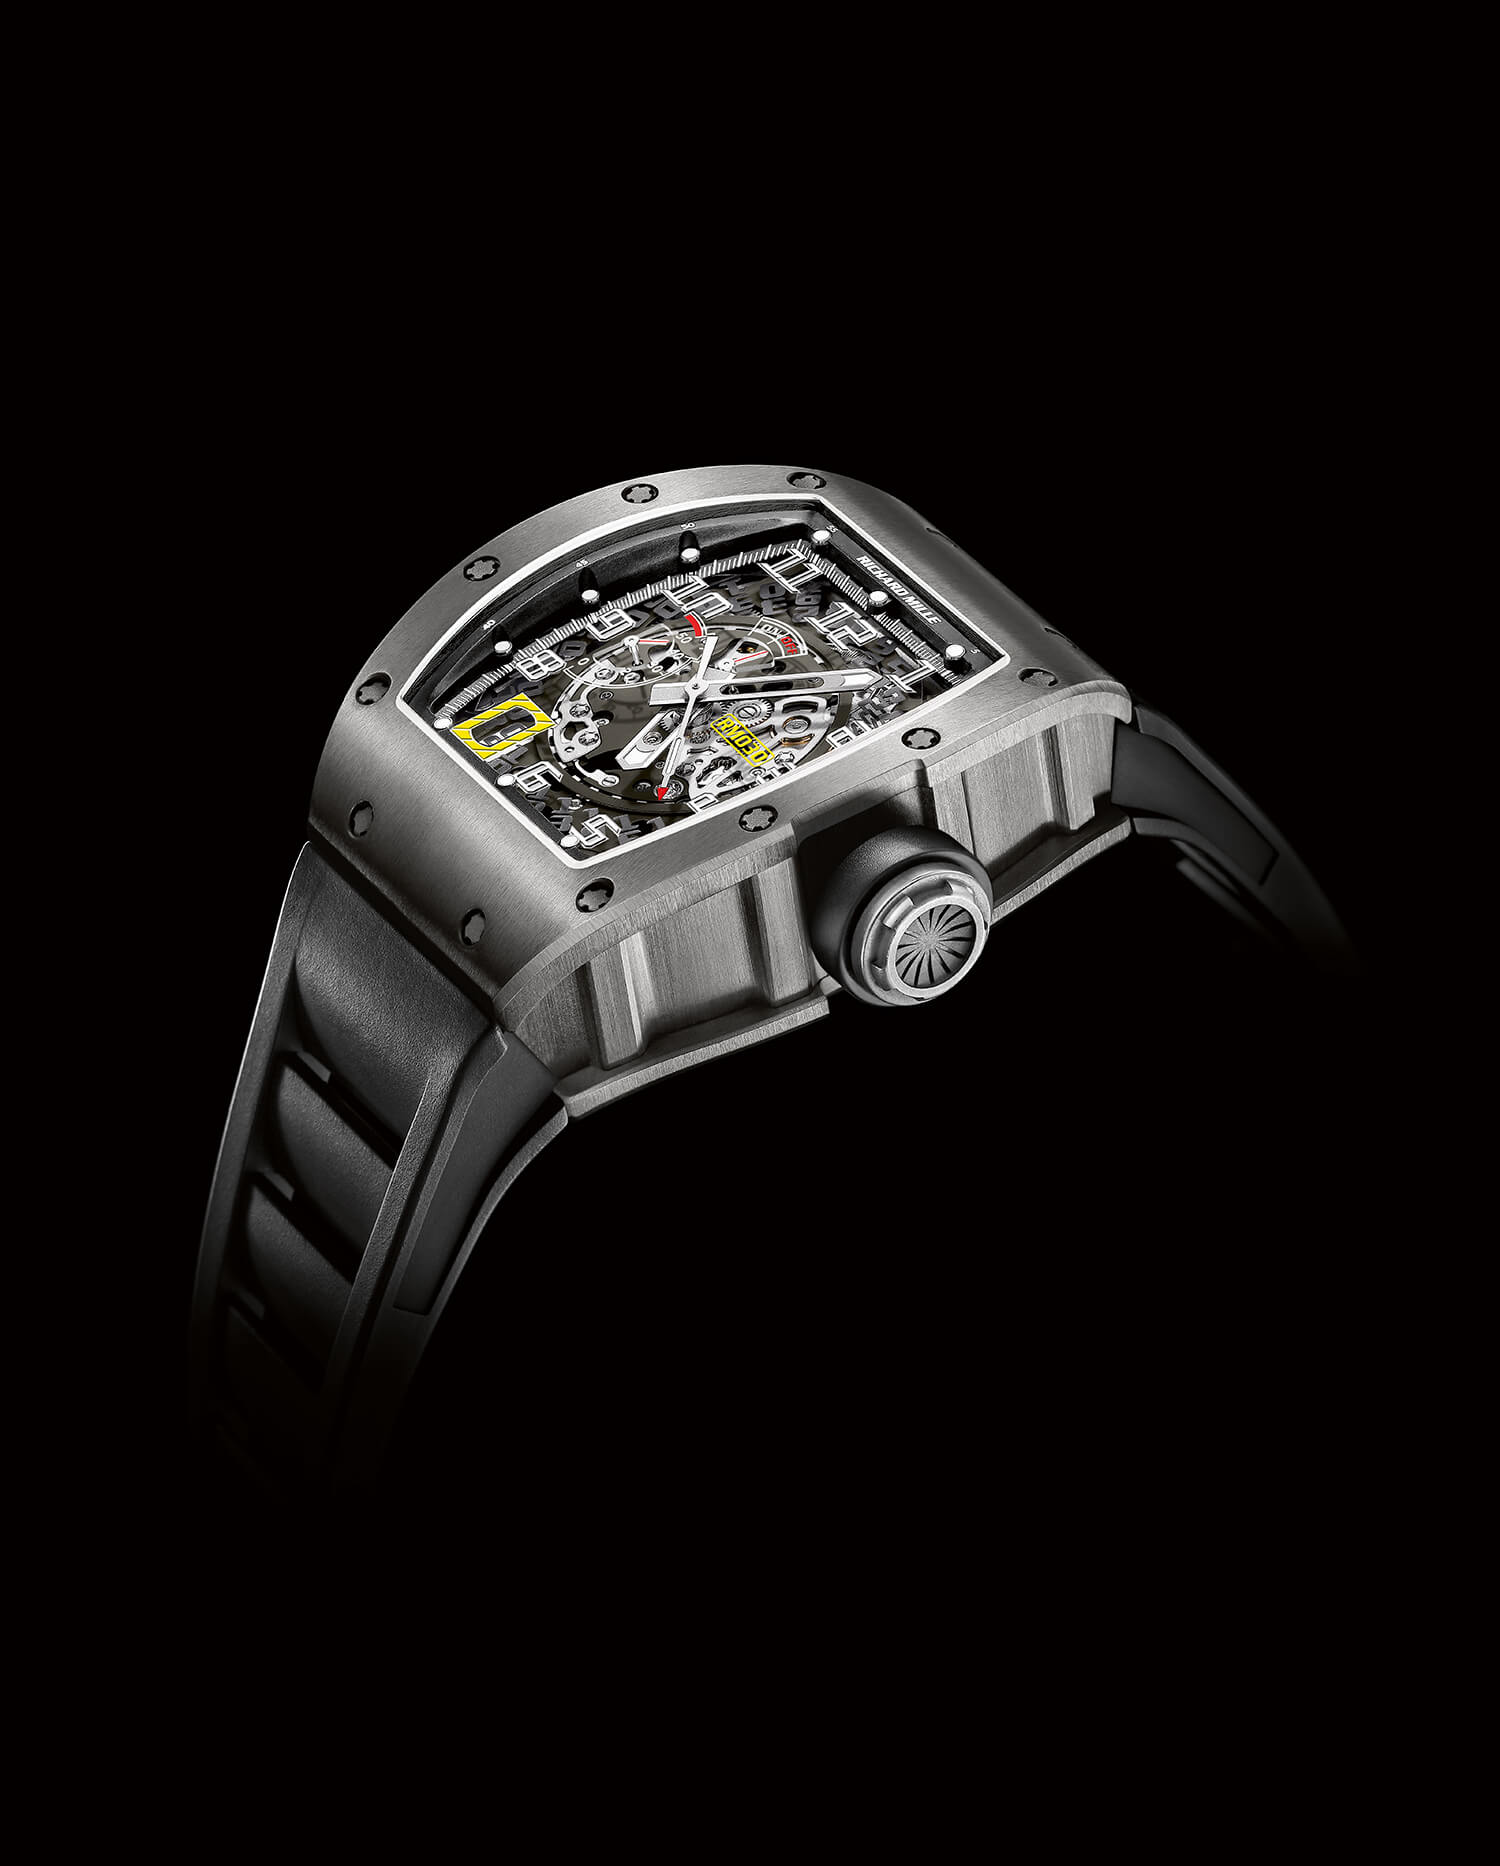 Richard Mille RM72-01 Automatic Winding Lifestyle Chronograph